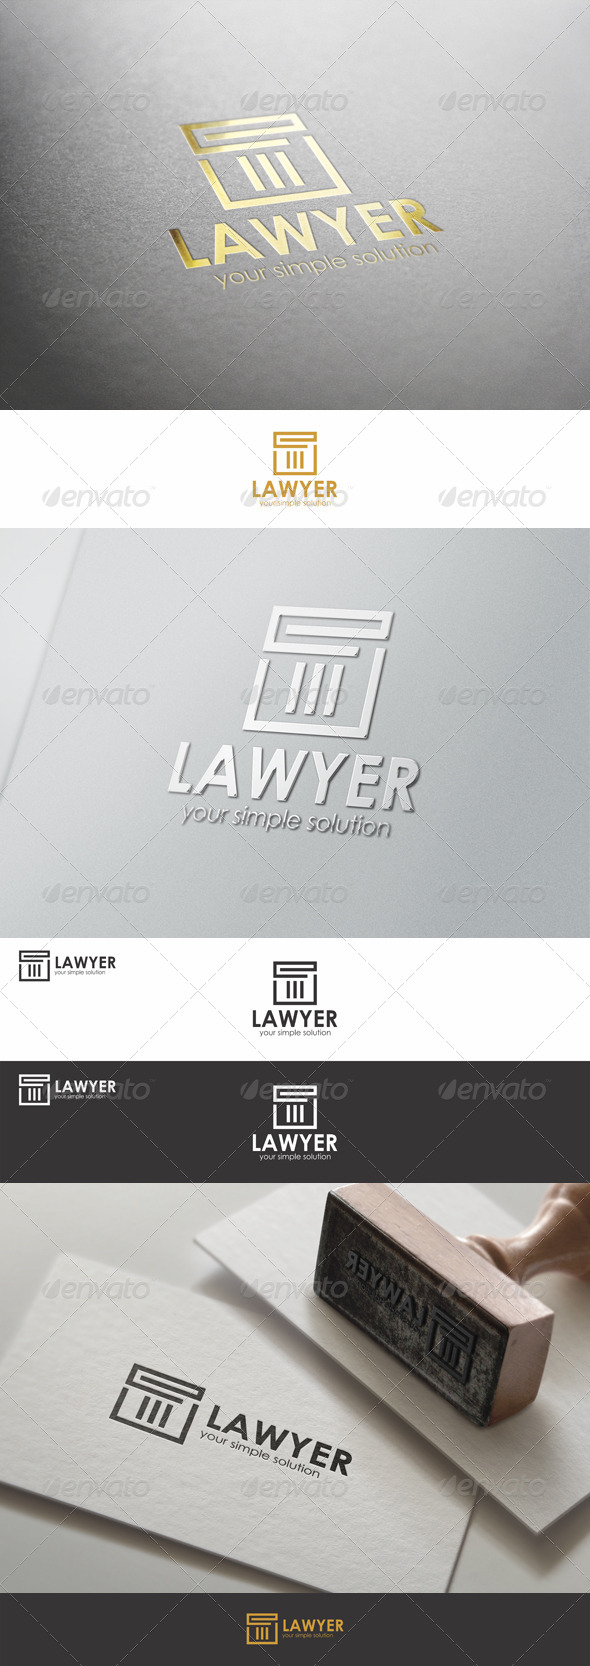 Lawyer - Justice Firm Logo